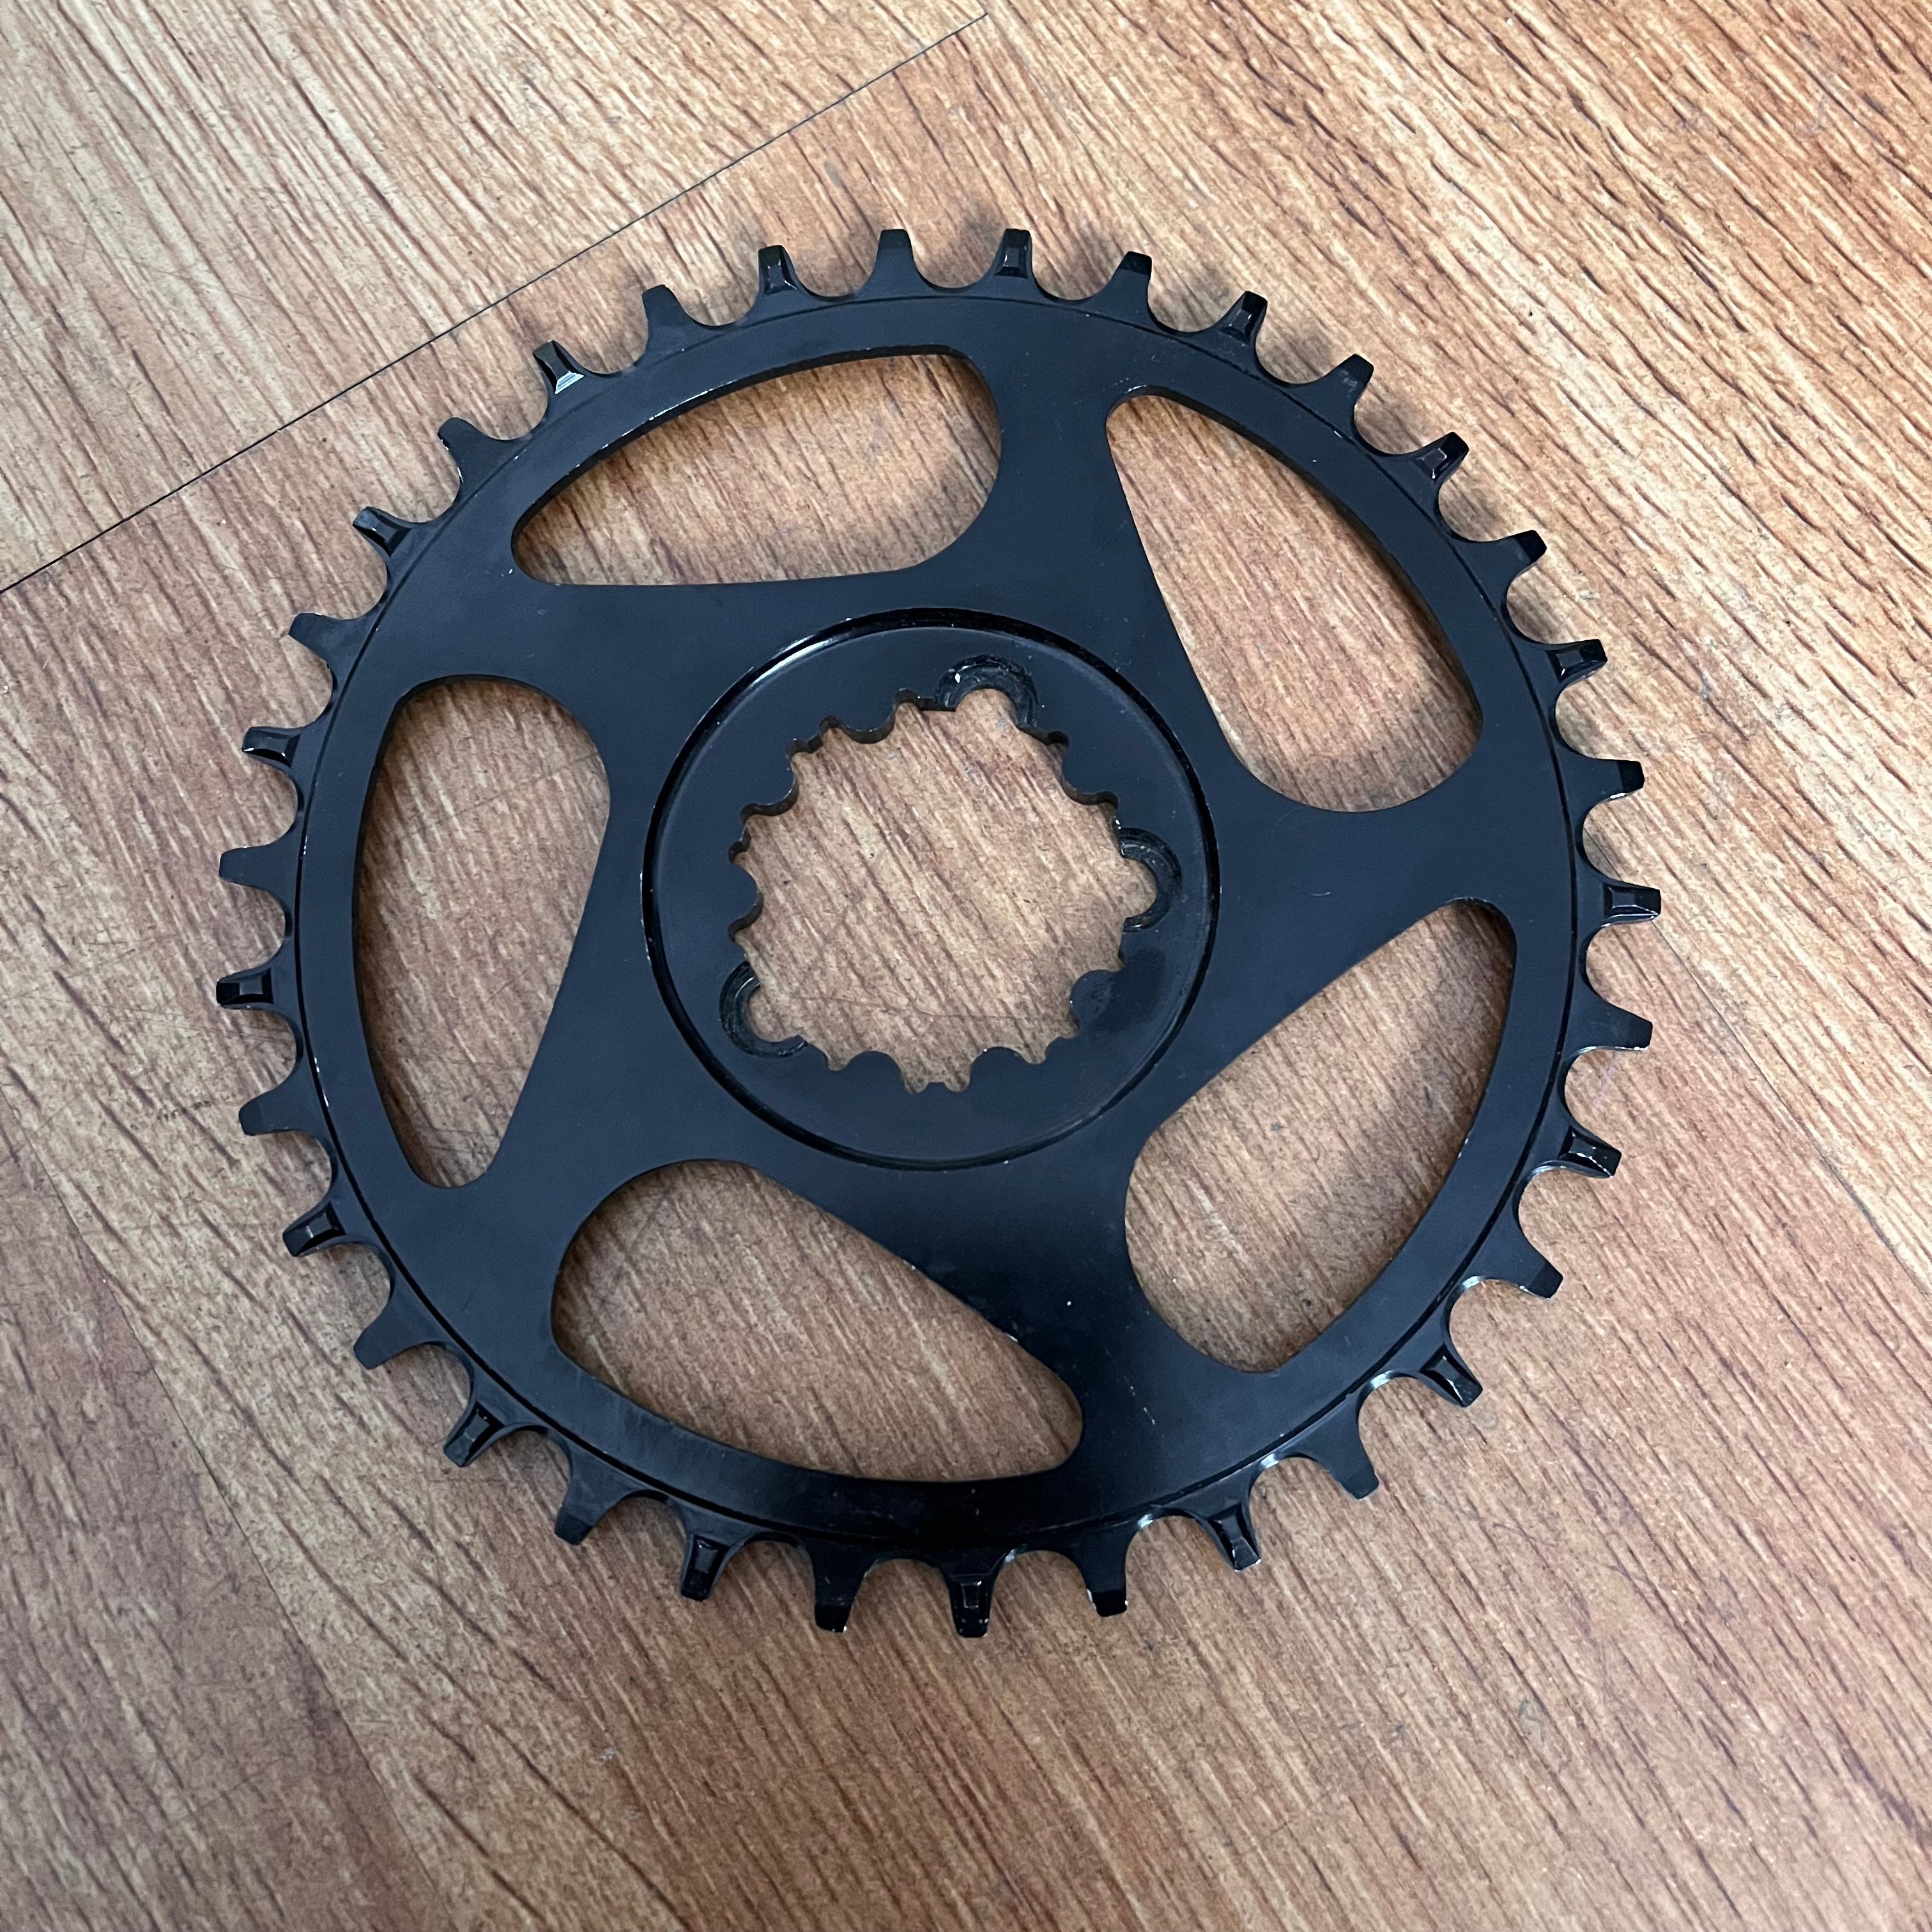 Shun MTB-04 GXP Narrow Wide Direct Mount Chainring 34 tooth - photo showing the wear of the chainring.